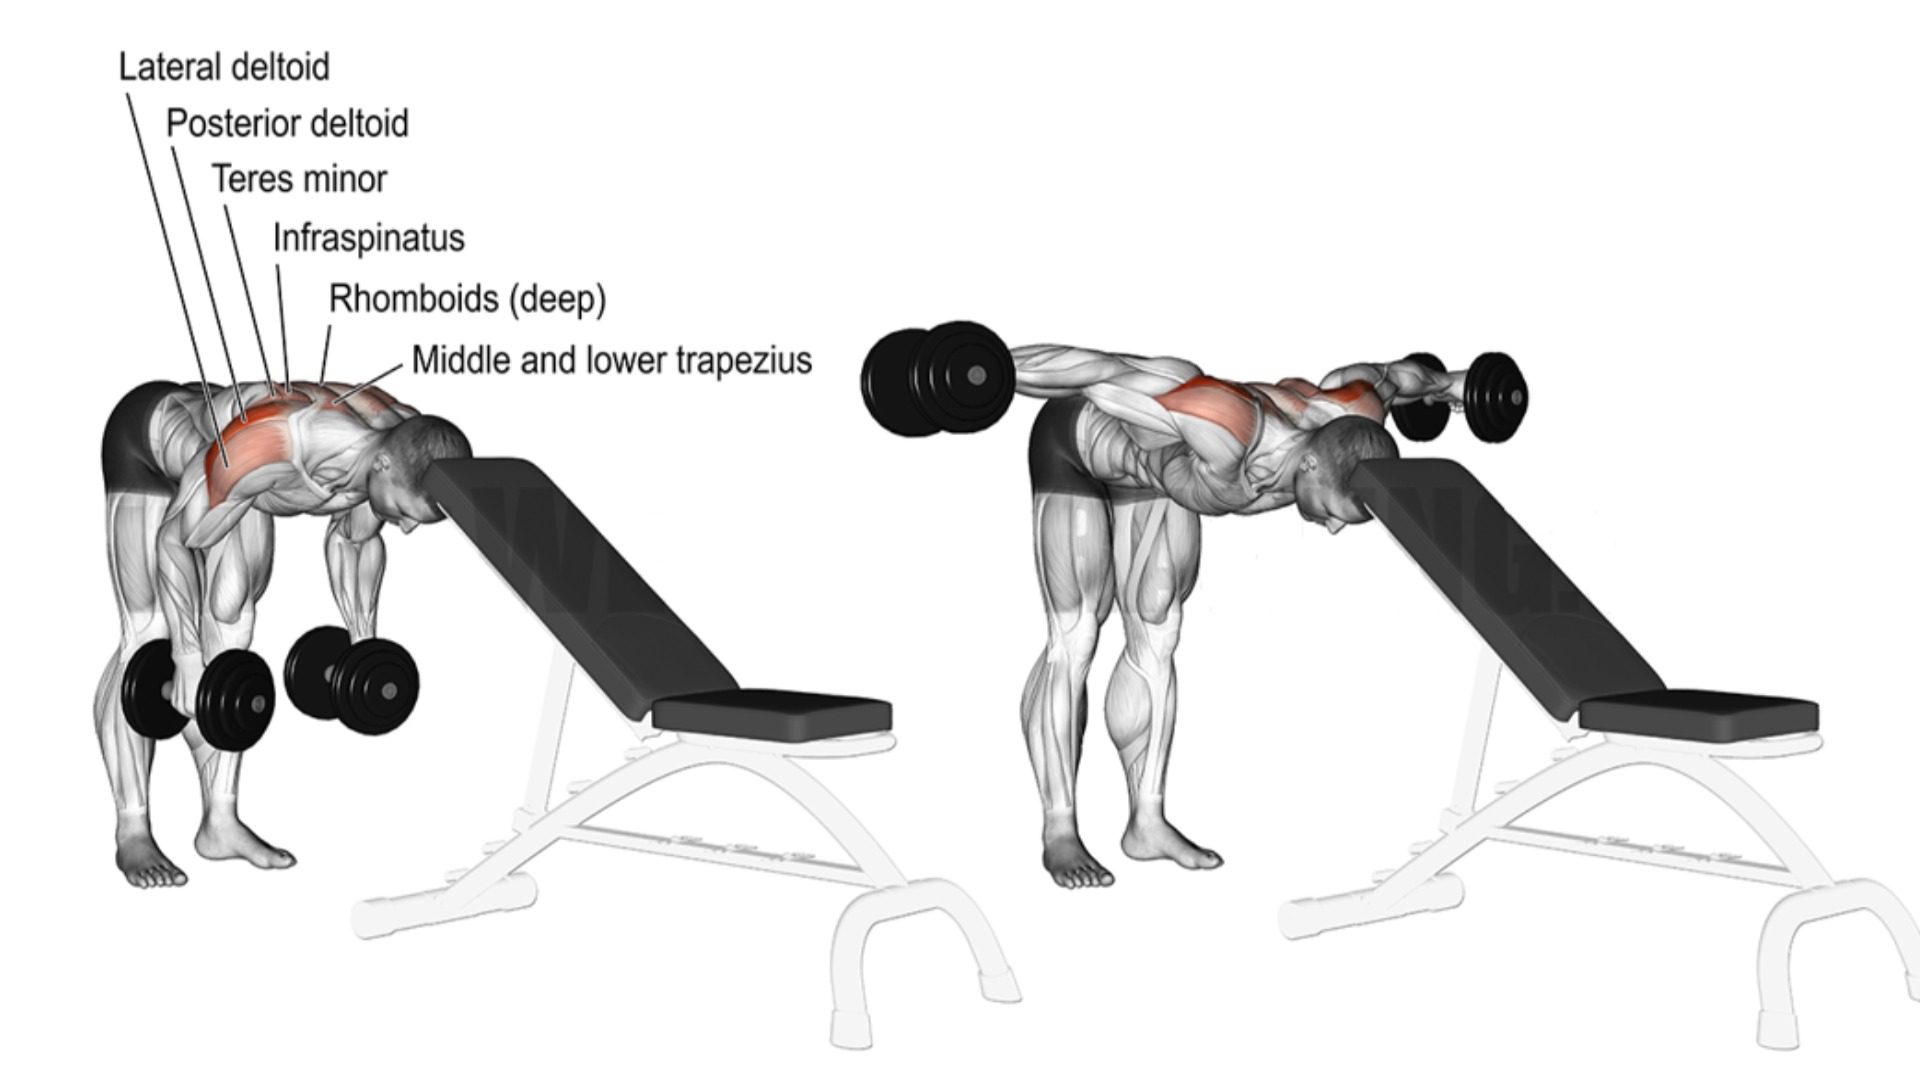 Head-supported reverse dumbbell fly